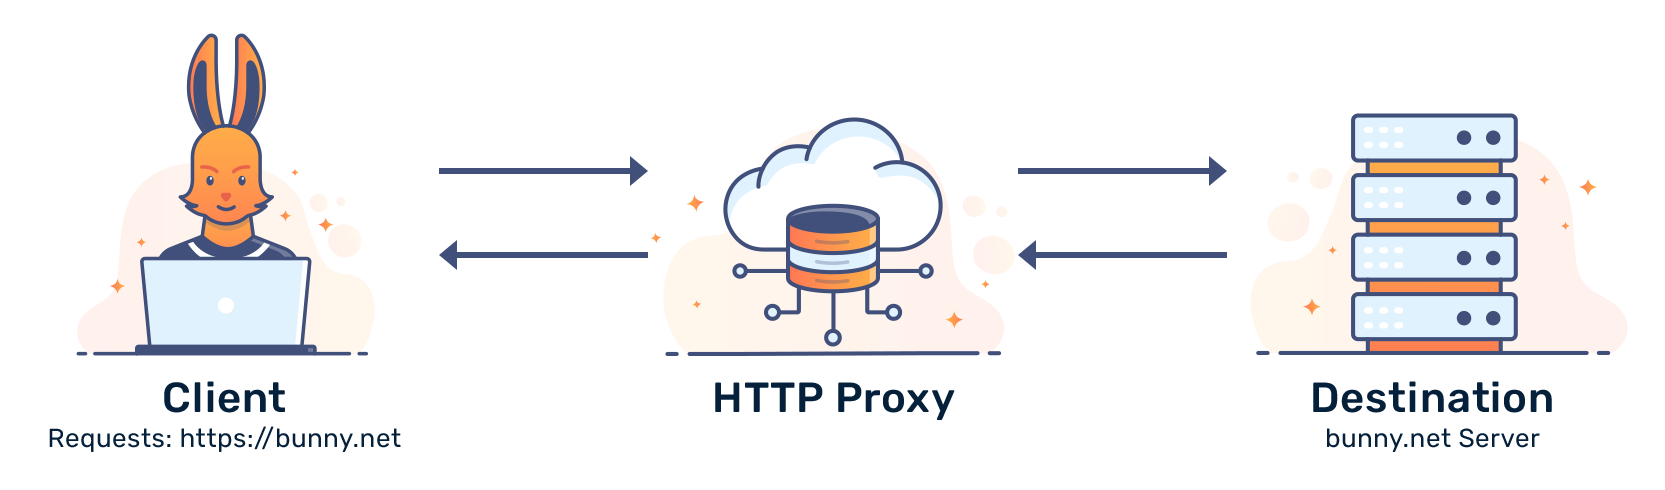 What is HTTP Proxy and is it sercure